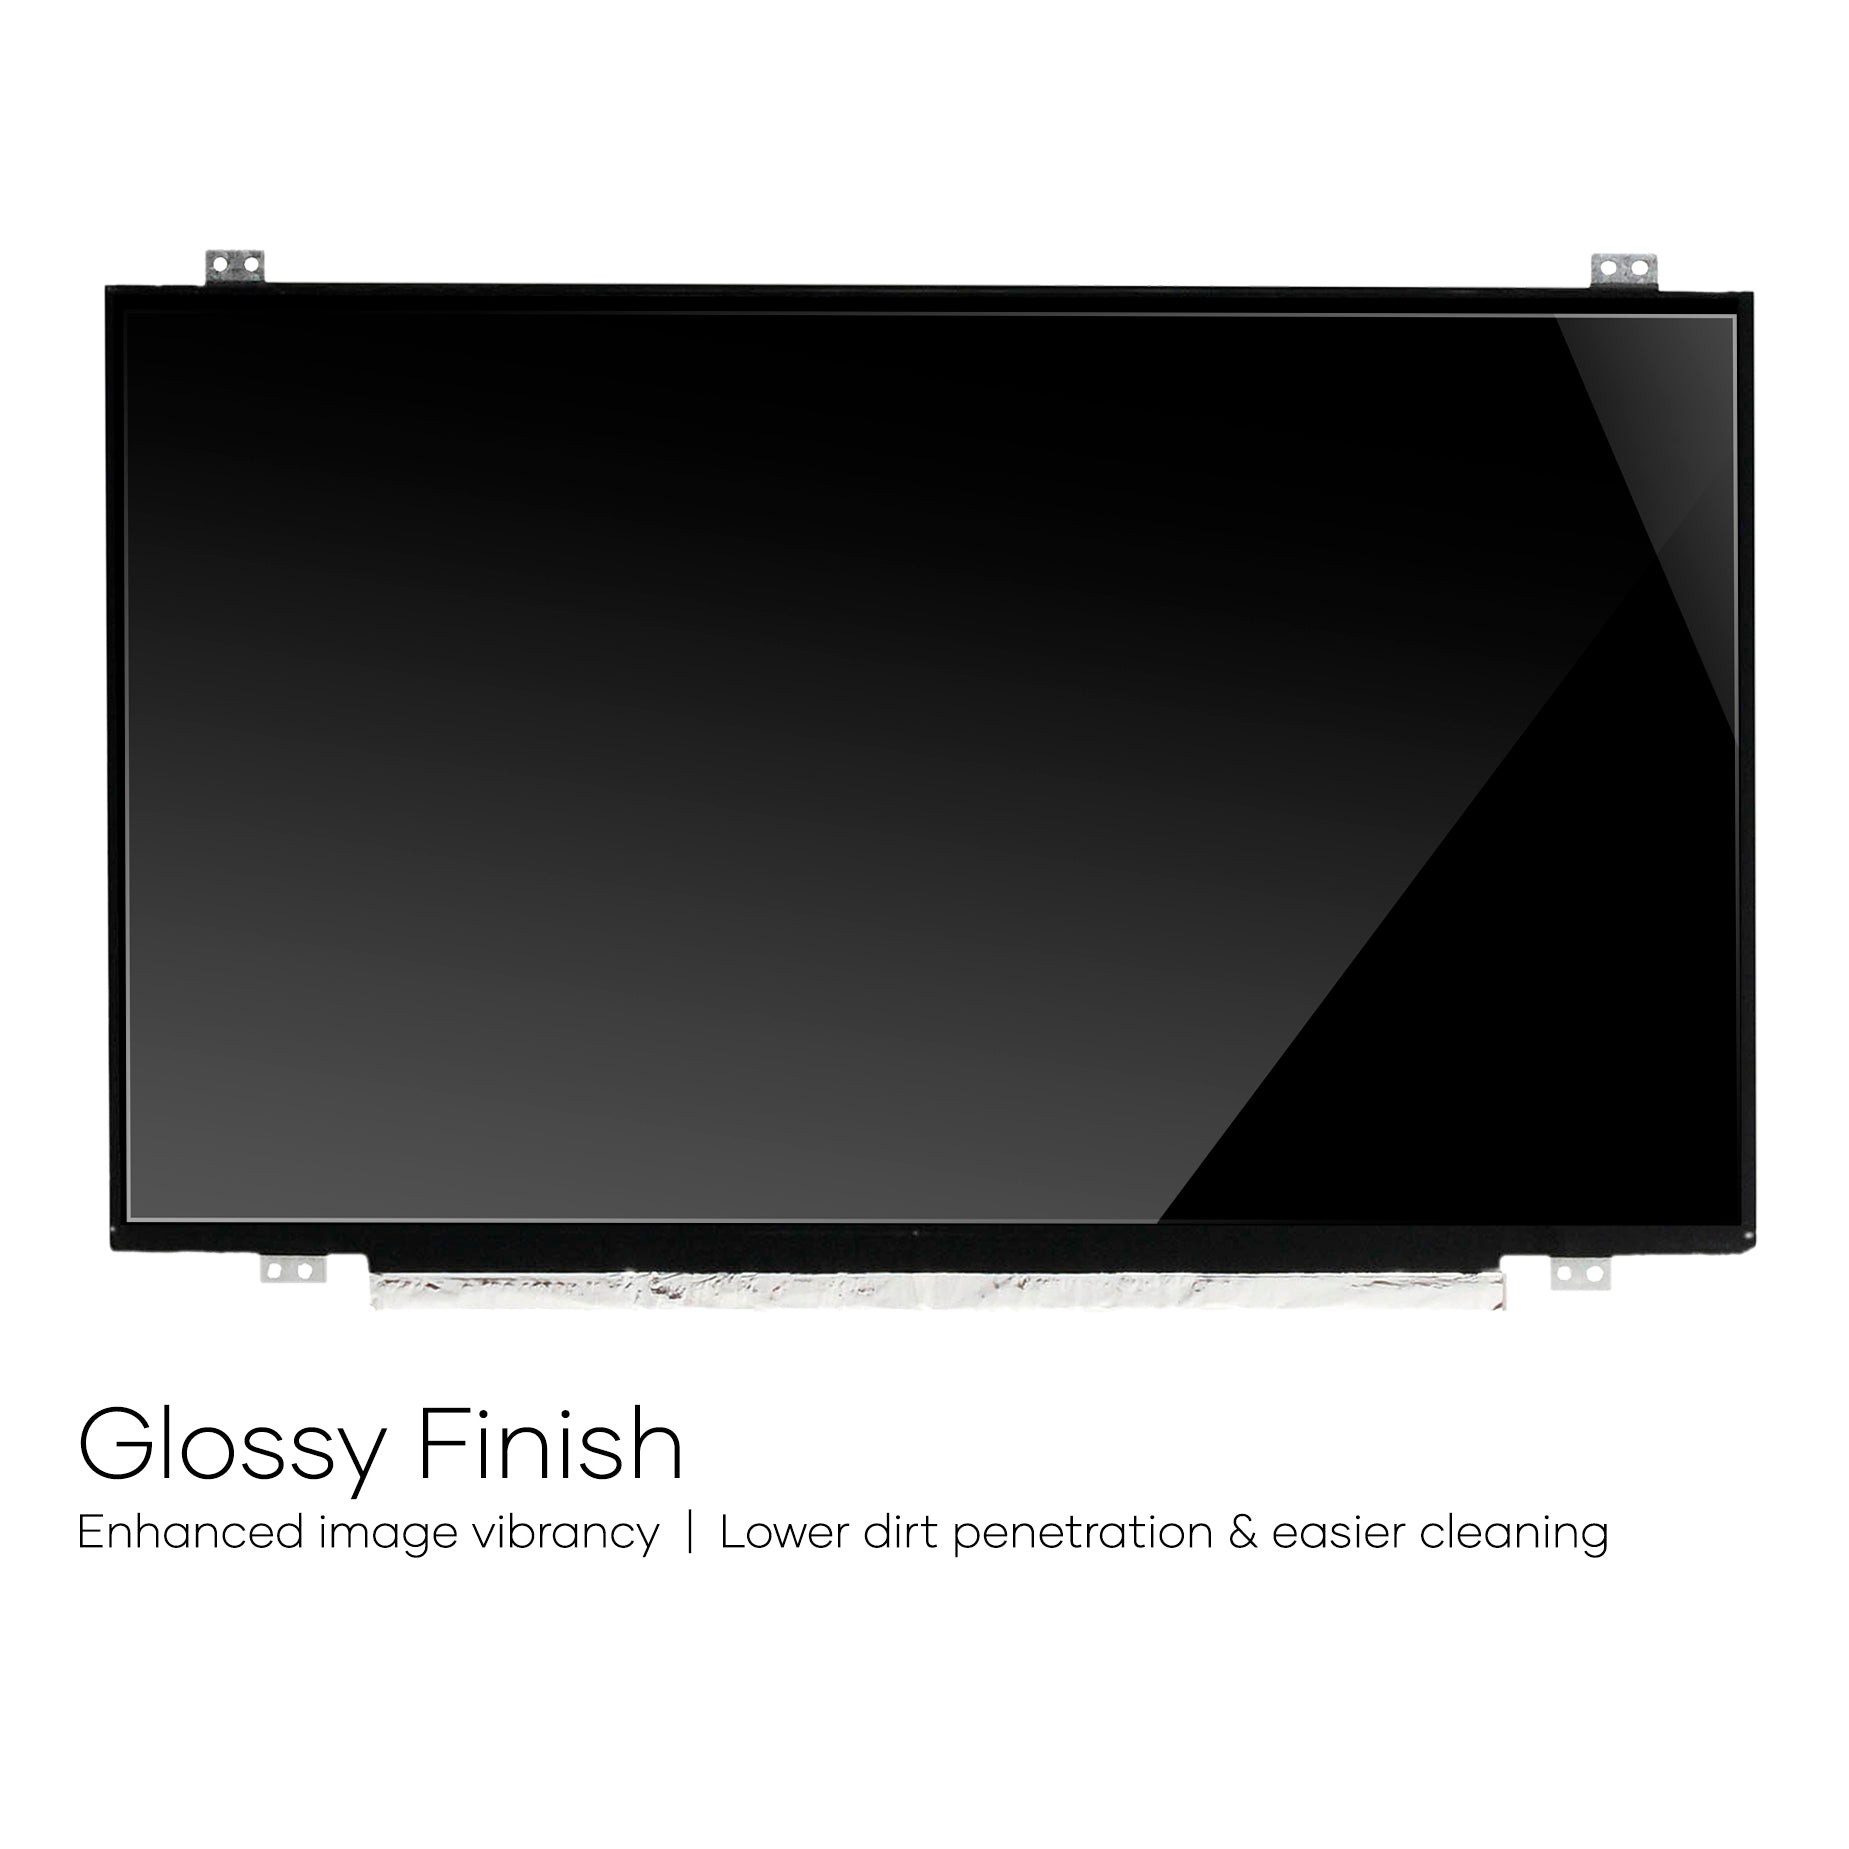 Screen Replacement for HB140WX1-501 V4.0 HD 1366x768 Glossy LCD LED Display